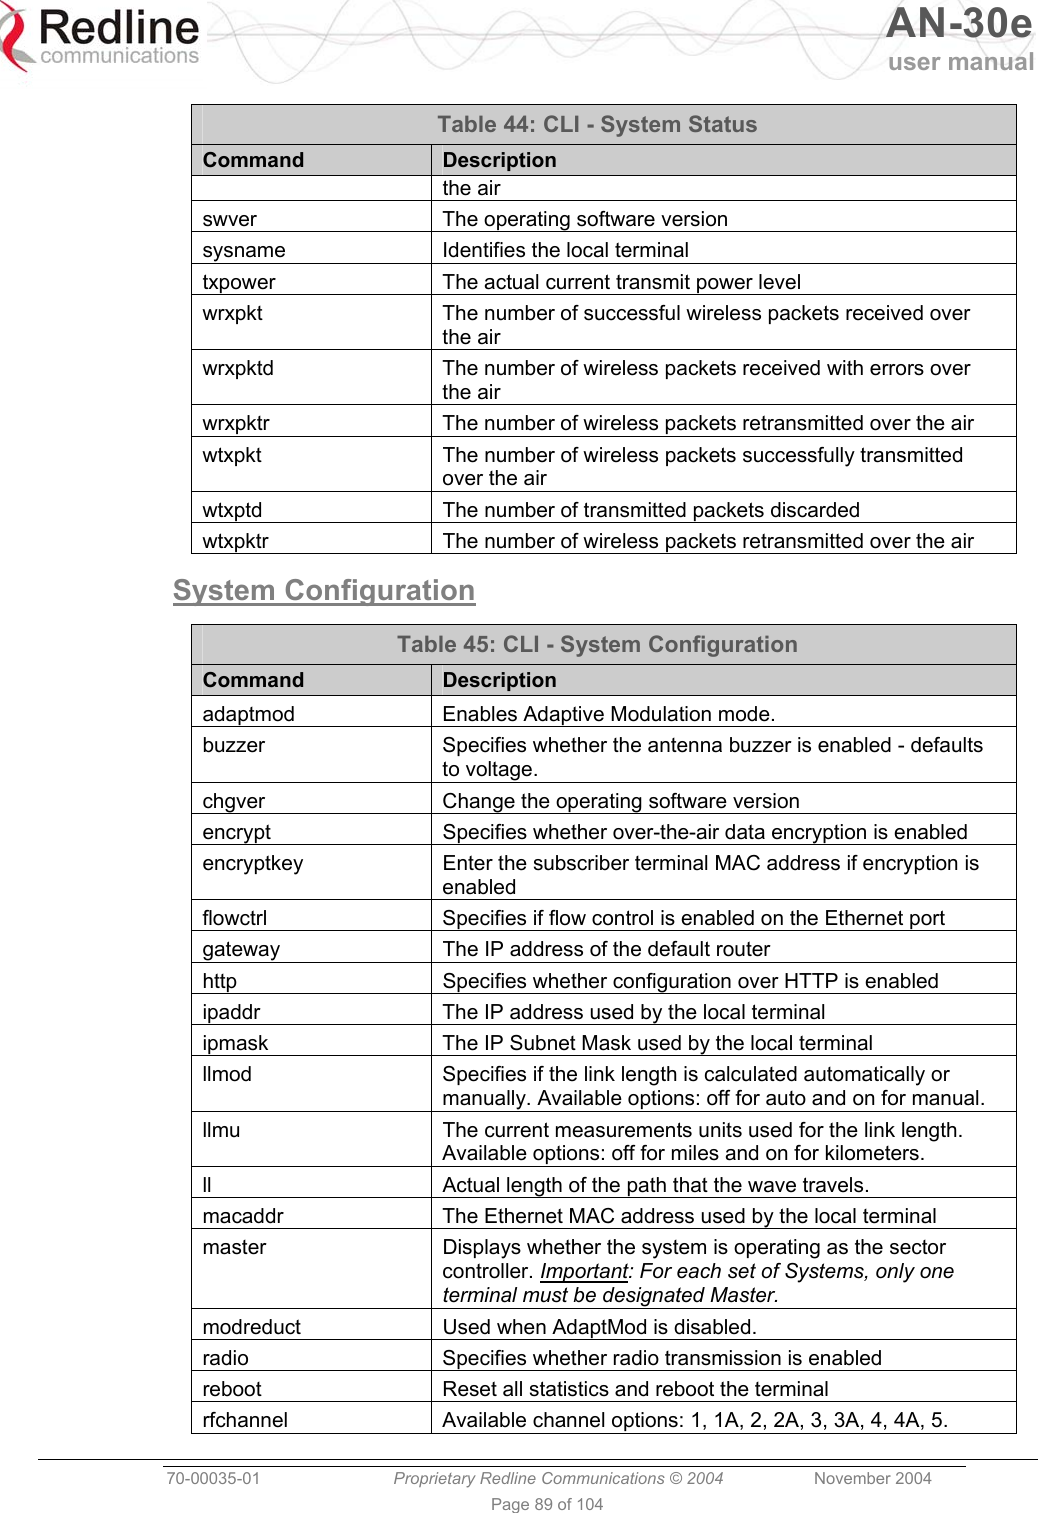   AN-30e user manual  70-00035-01  Proprietary Redline Communications © 2004 November 2004   Page 89 of 104 Table 44: CLI - System Status Command  Description the air swver  The operating software version sysname  Identifies the local terminal txpower  The actual current transmit power level wrxpkt  The number of successful wireless packets received over the air wrxpktd  The number of wireless packets received with errors over the air wrxpktr  The number of wireless packets retransmitted over the air wtxpkt  The number of wireless packets successfully transmitted over the air wtxptd  The number of transmitted packets discarded wtxpktr  The number of wireless packets retransmitted over the air System Configuration  Table 45: CLI - System Configuration Command  Description adaptmod  Enables Adaptive Modulation mode.  buzzer  Specifies whether the antenna buzzer is enabled - defaults to voltage. chgver  Change the operating software version encrypt Specifies whether over-the-air data encryption is enabled encryptkey  Enter the subscriber terminal MAC address if encryption is enabled flowctrl  Specifies if flow control is enabled on the Ethernet port  gateway  The IP address of the default router http  Specifies whether configuration over HTTP is enabled ipaddr  The IP address used by the local terminal ipmask  The IP Subnet Mask used by the local terminal llmod  Specifies if the link length is calculated automatically or manually. Available options: off for auto and on for manual. llmu  The current measurements units used for the link length. Available options: off for miles and on for kilometers. ll  Actual length of the path that the wave travels. macaddr  The Ethernet MAC address used by the local terminal master  Displays whether the system is operating as the sector controller. Important: For each set of Systems, only one terminal must be designated Master. modreduct  Used when AdaptMod is disabled.  radio  Specifies whether radio transmission is enabled reboot  Reset all statistics and reboot the terminal rfchannel  Available channel options: 1, 1A, 2, 2A, 3, 3A, 4, 4A, 5. 